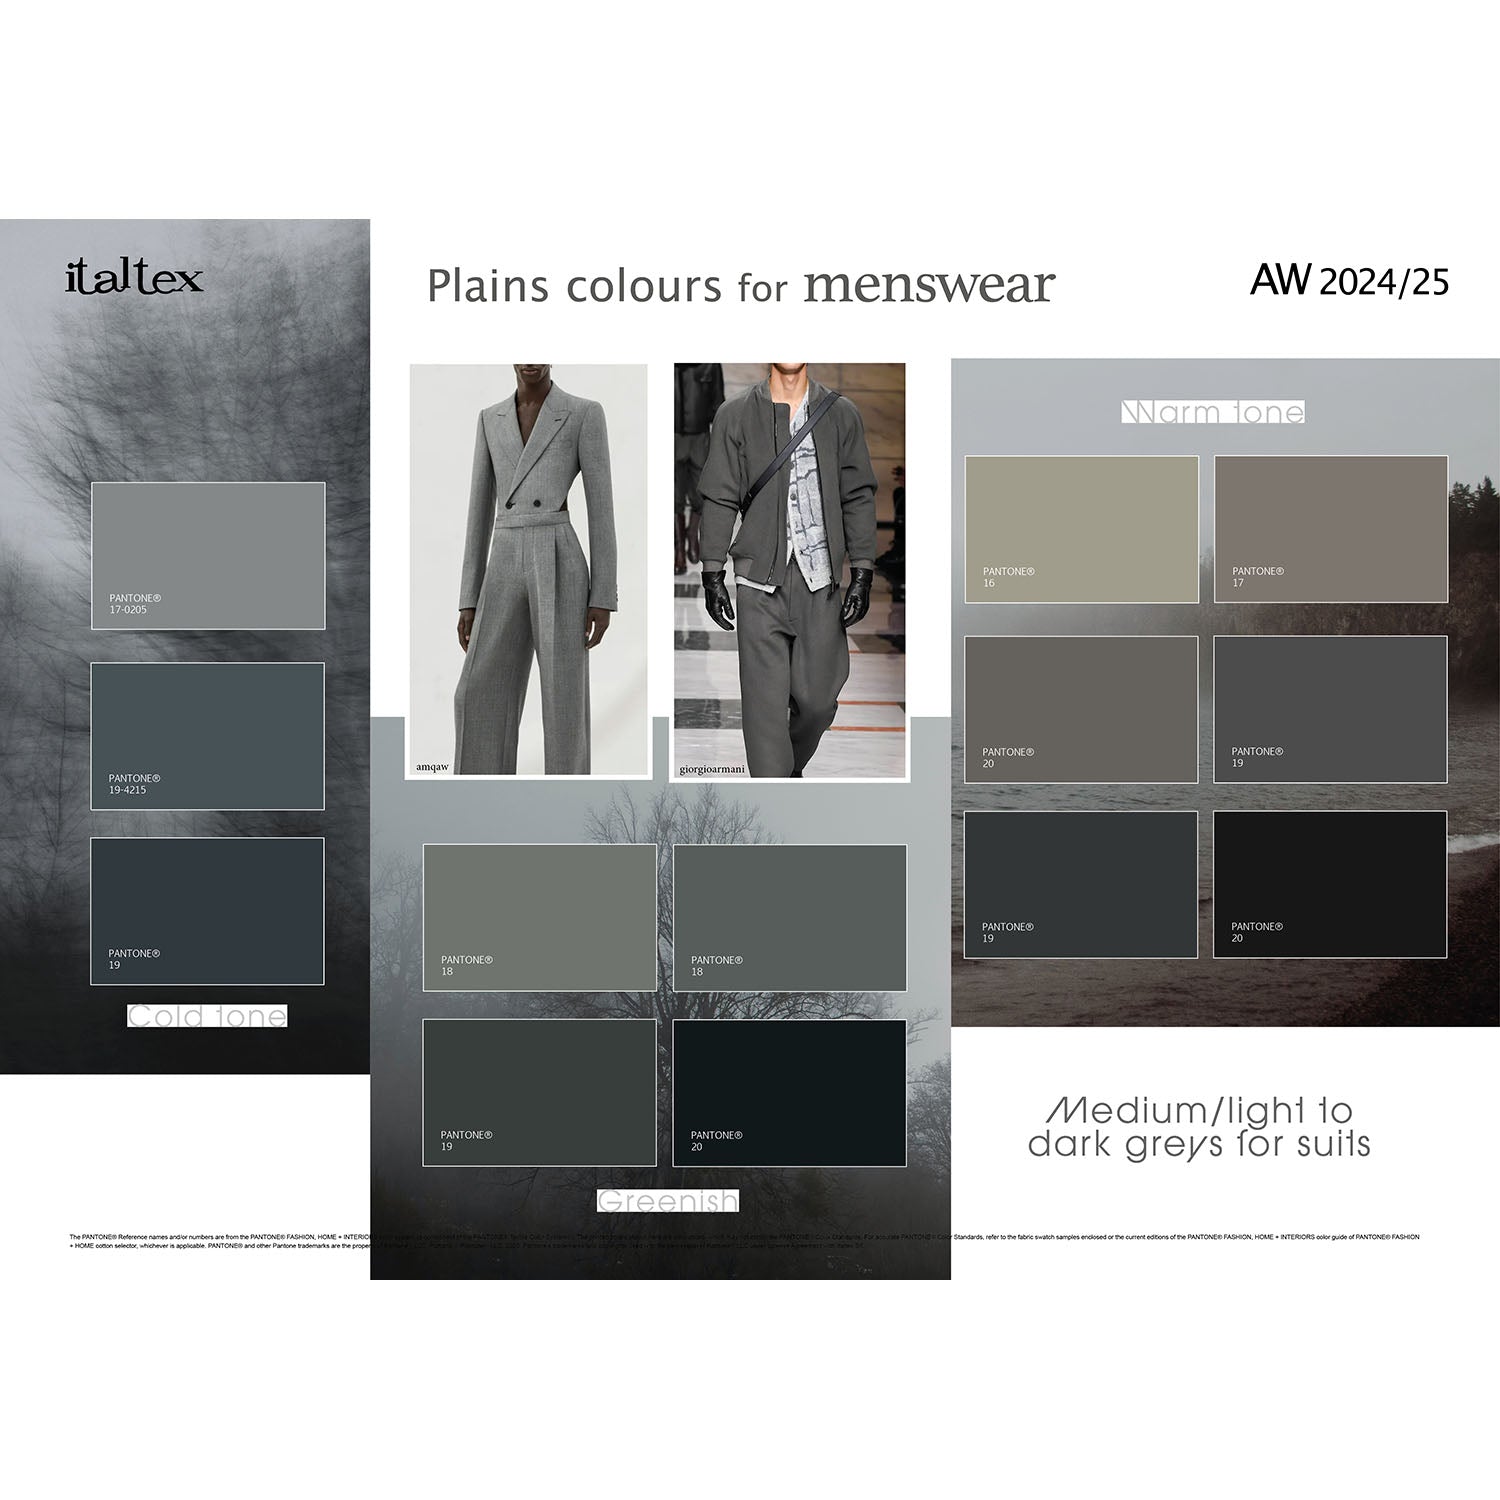 thirteen medium/light to dark grey tones for men's suits Winter 2024/25 with Pantone reference codes. They are presented in rectangular shapes. Two models from the runways suggest possible uses of fabrics in those colours.